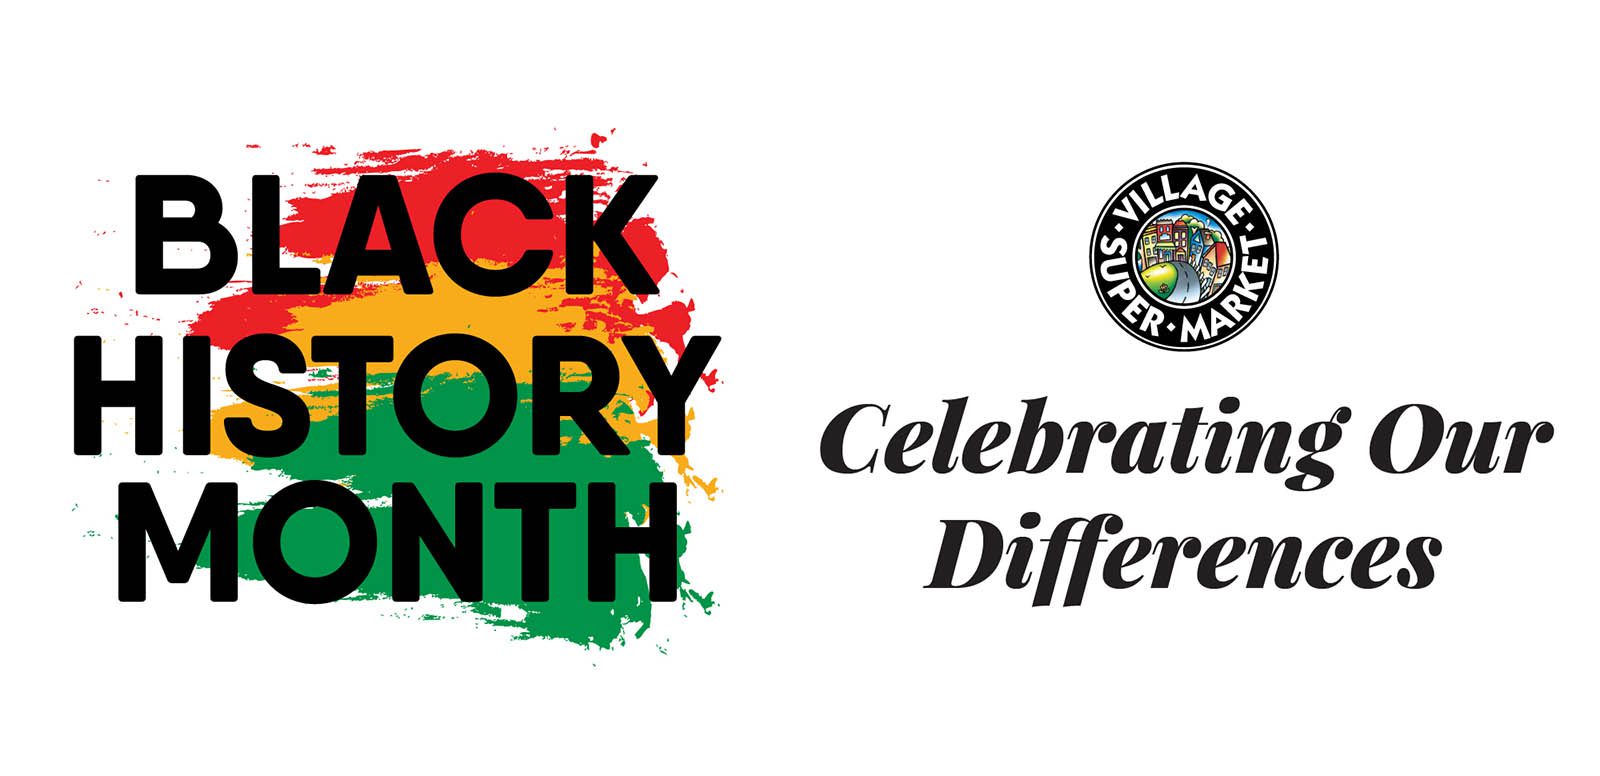 Celebrating Our Differences – Black History Month